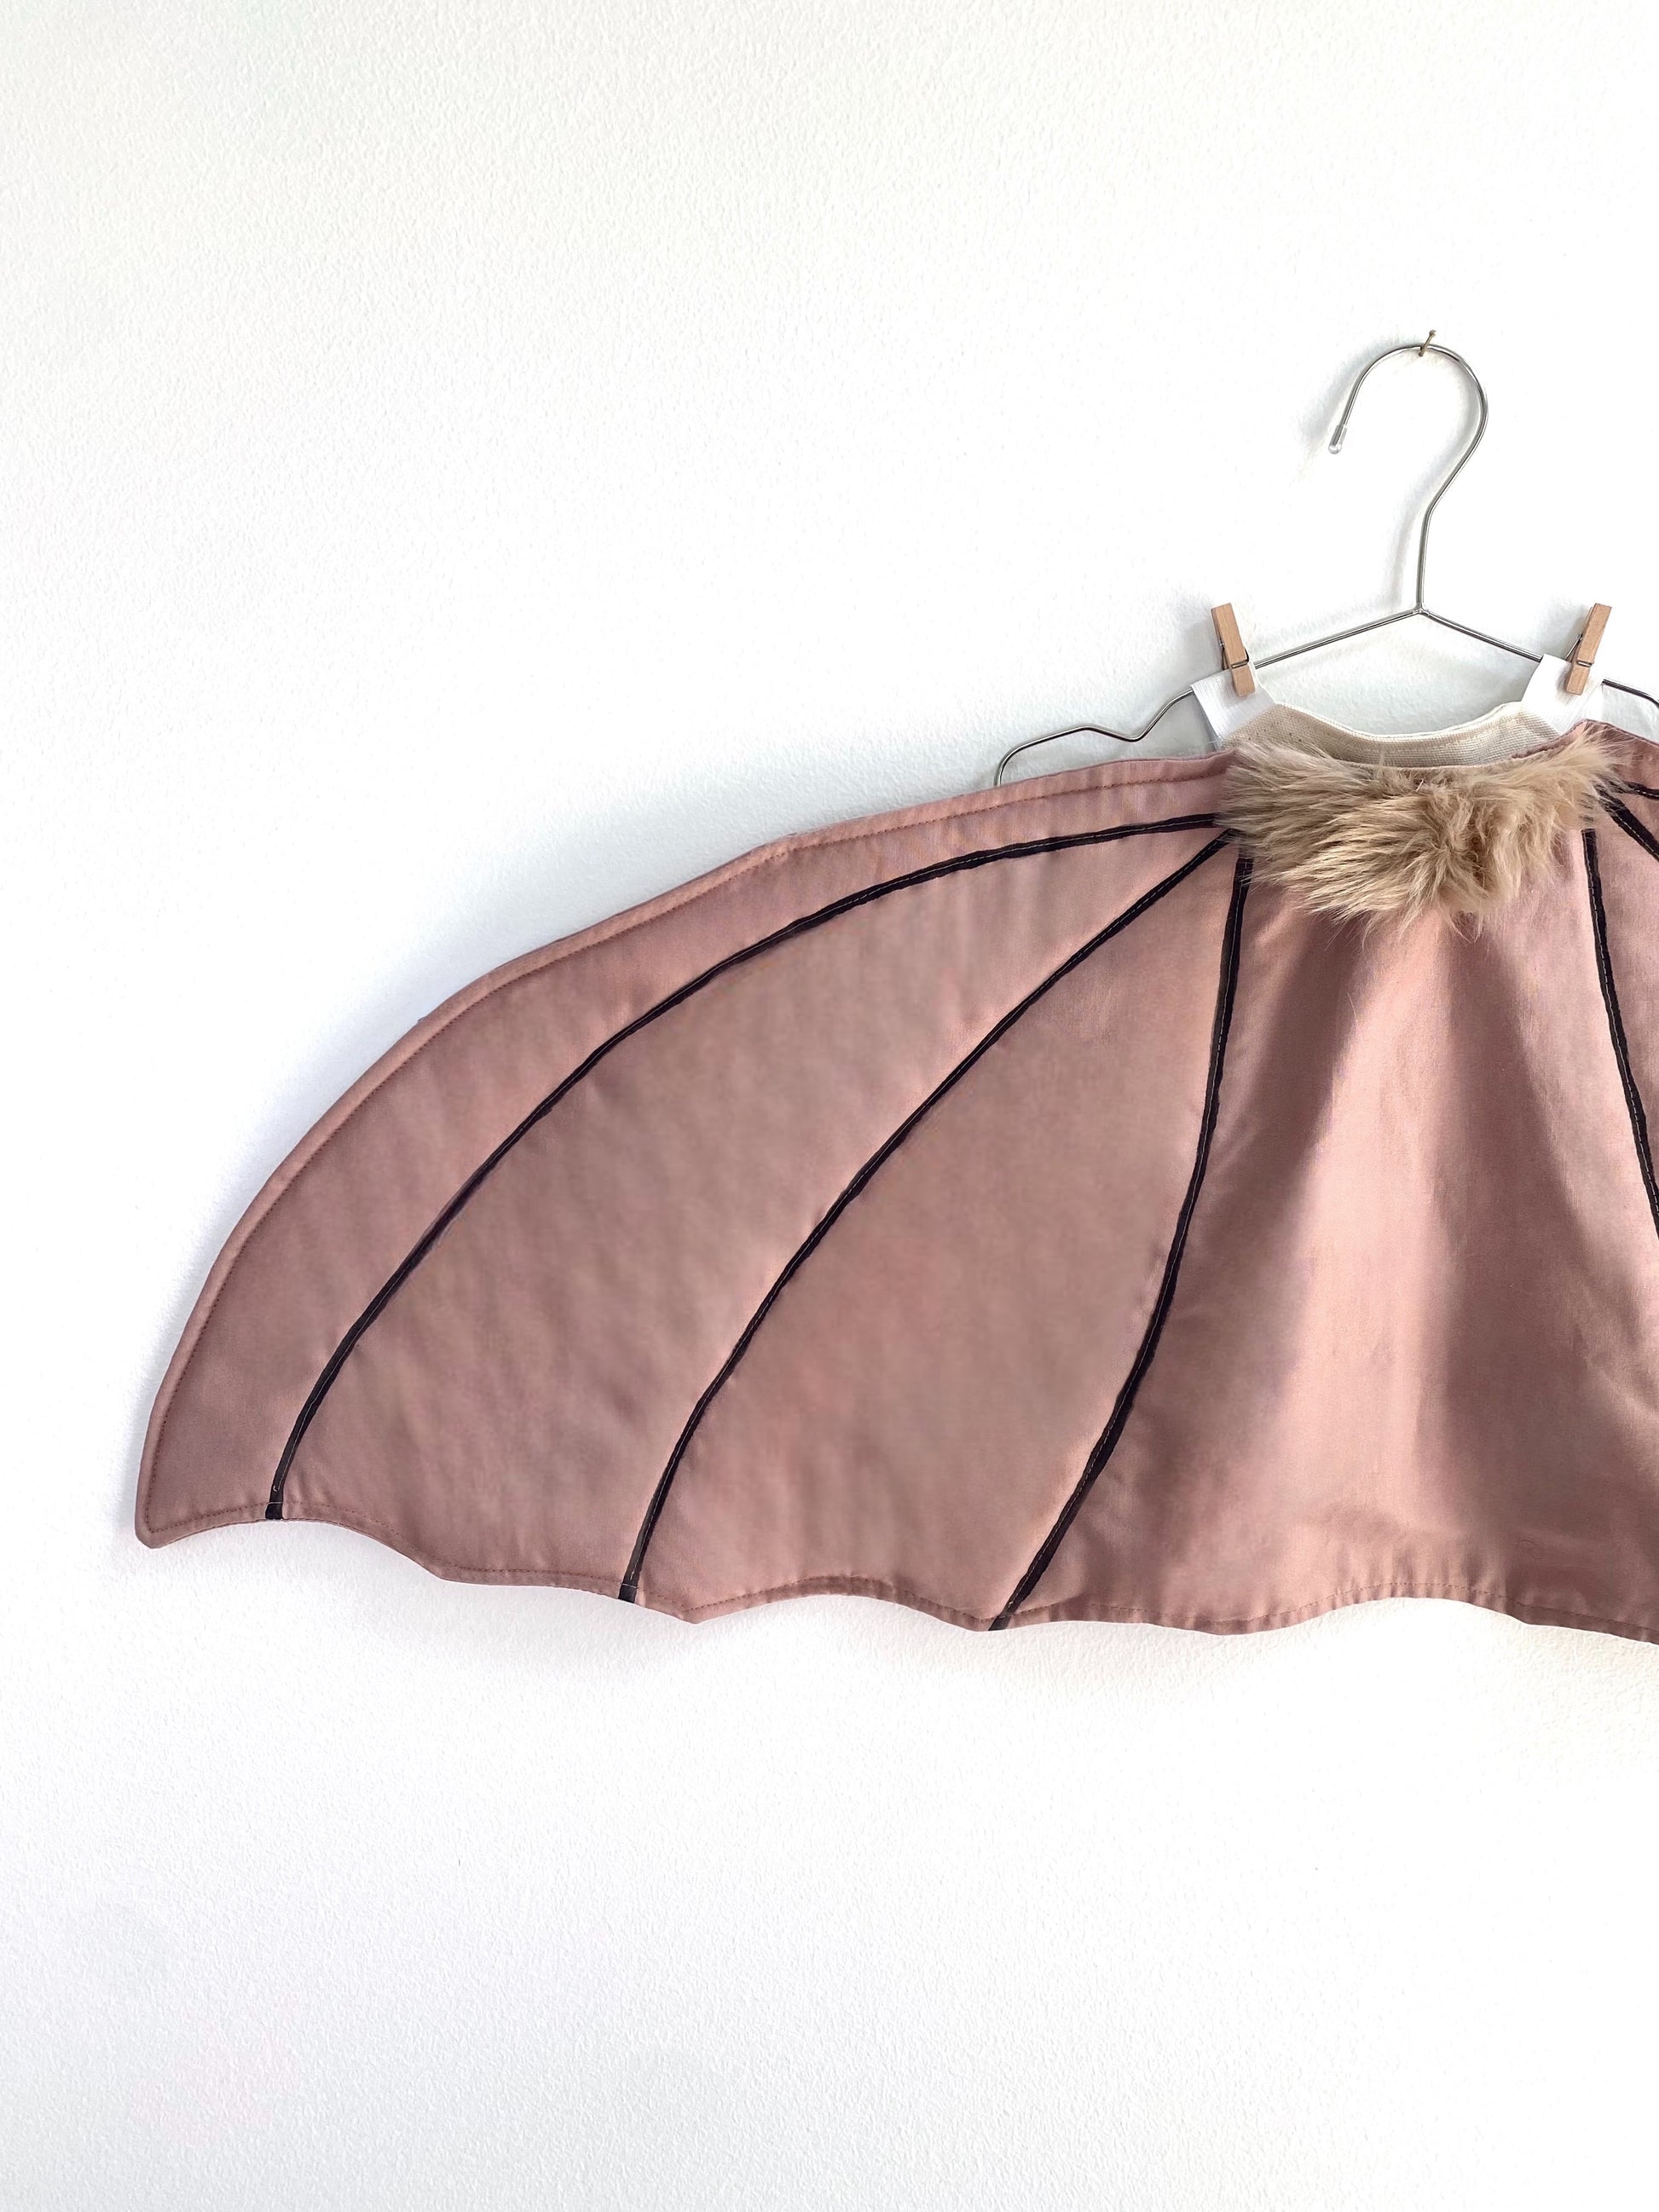 Made in USA brown bat costume wings for kids.